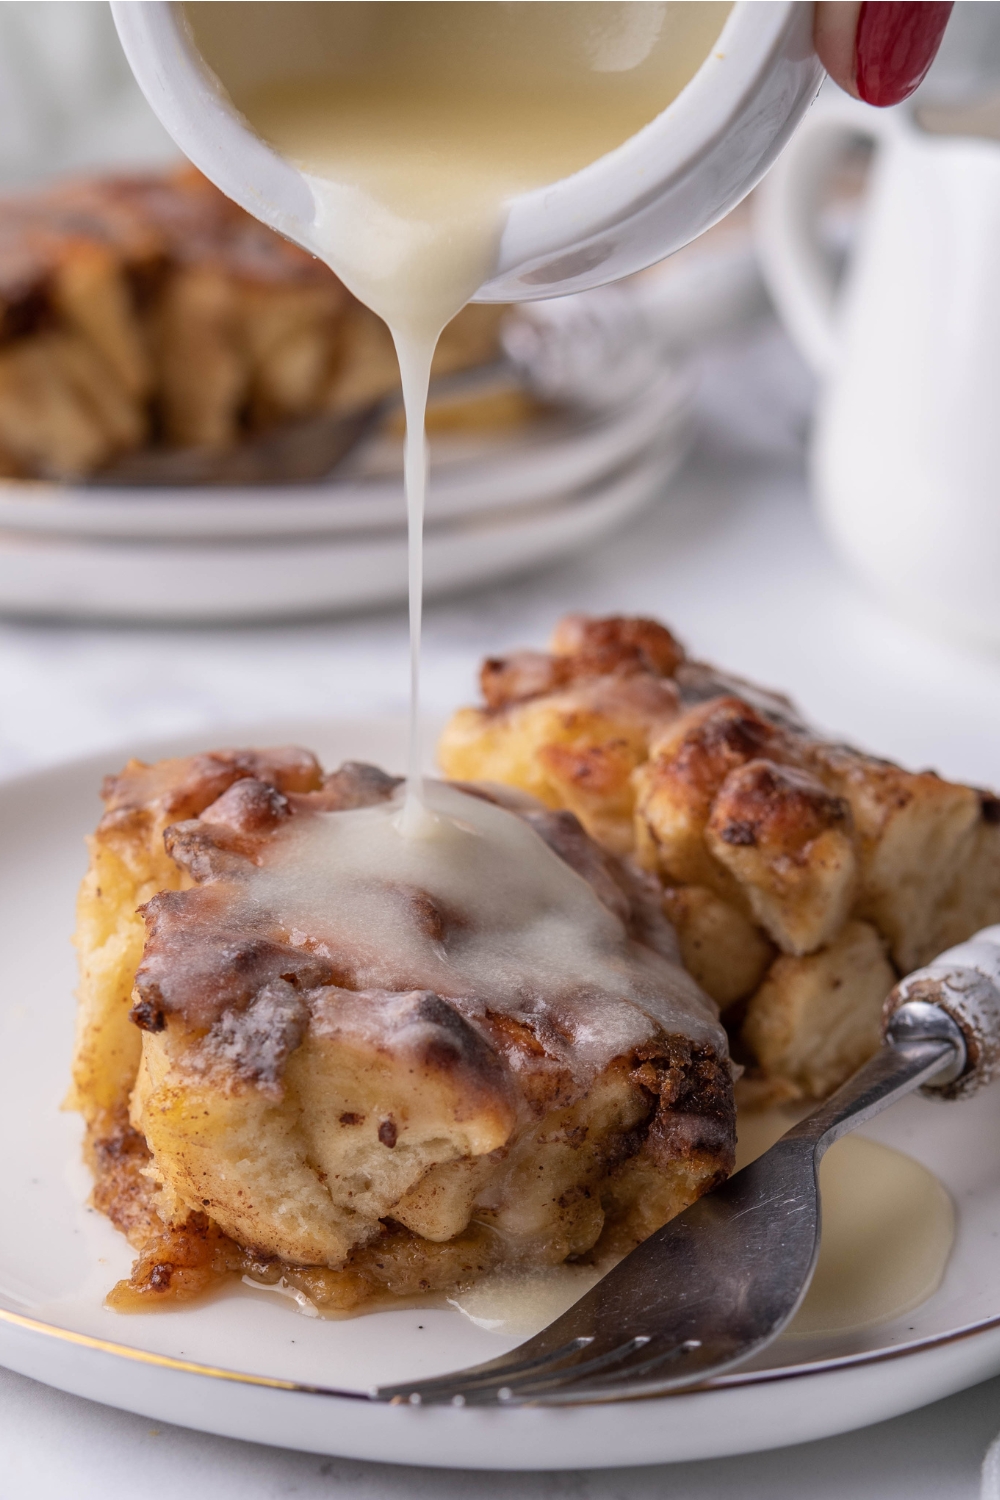 icing being drizzled on top of cinnamon rolls on a plate.